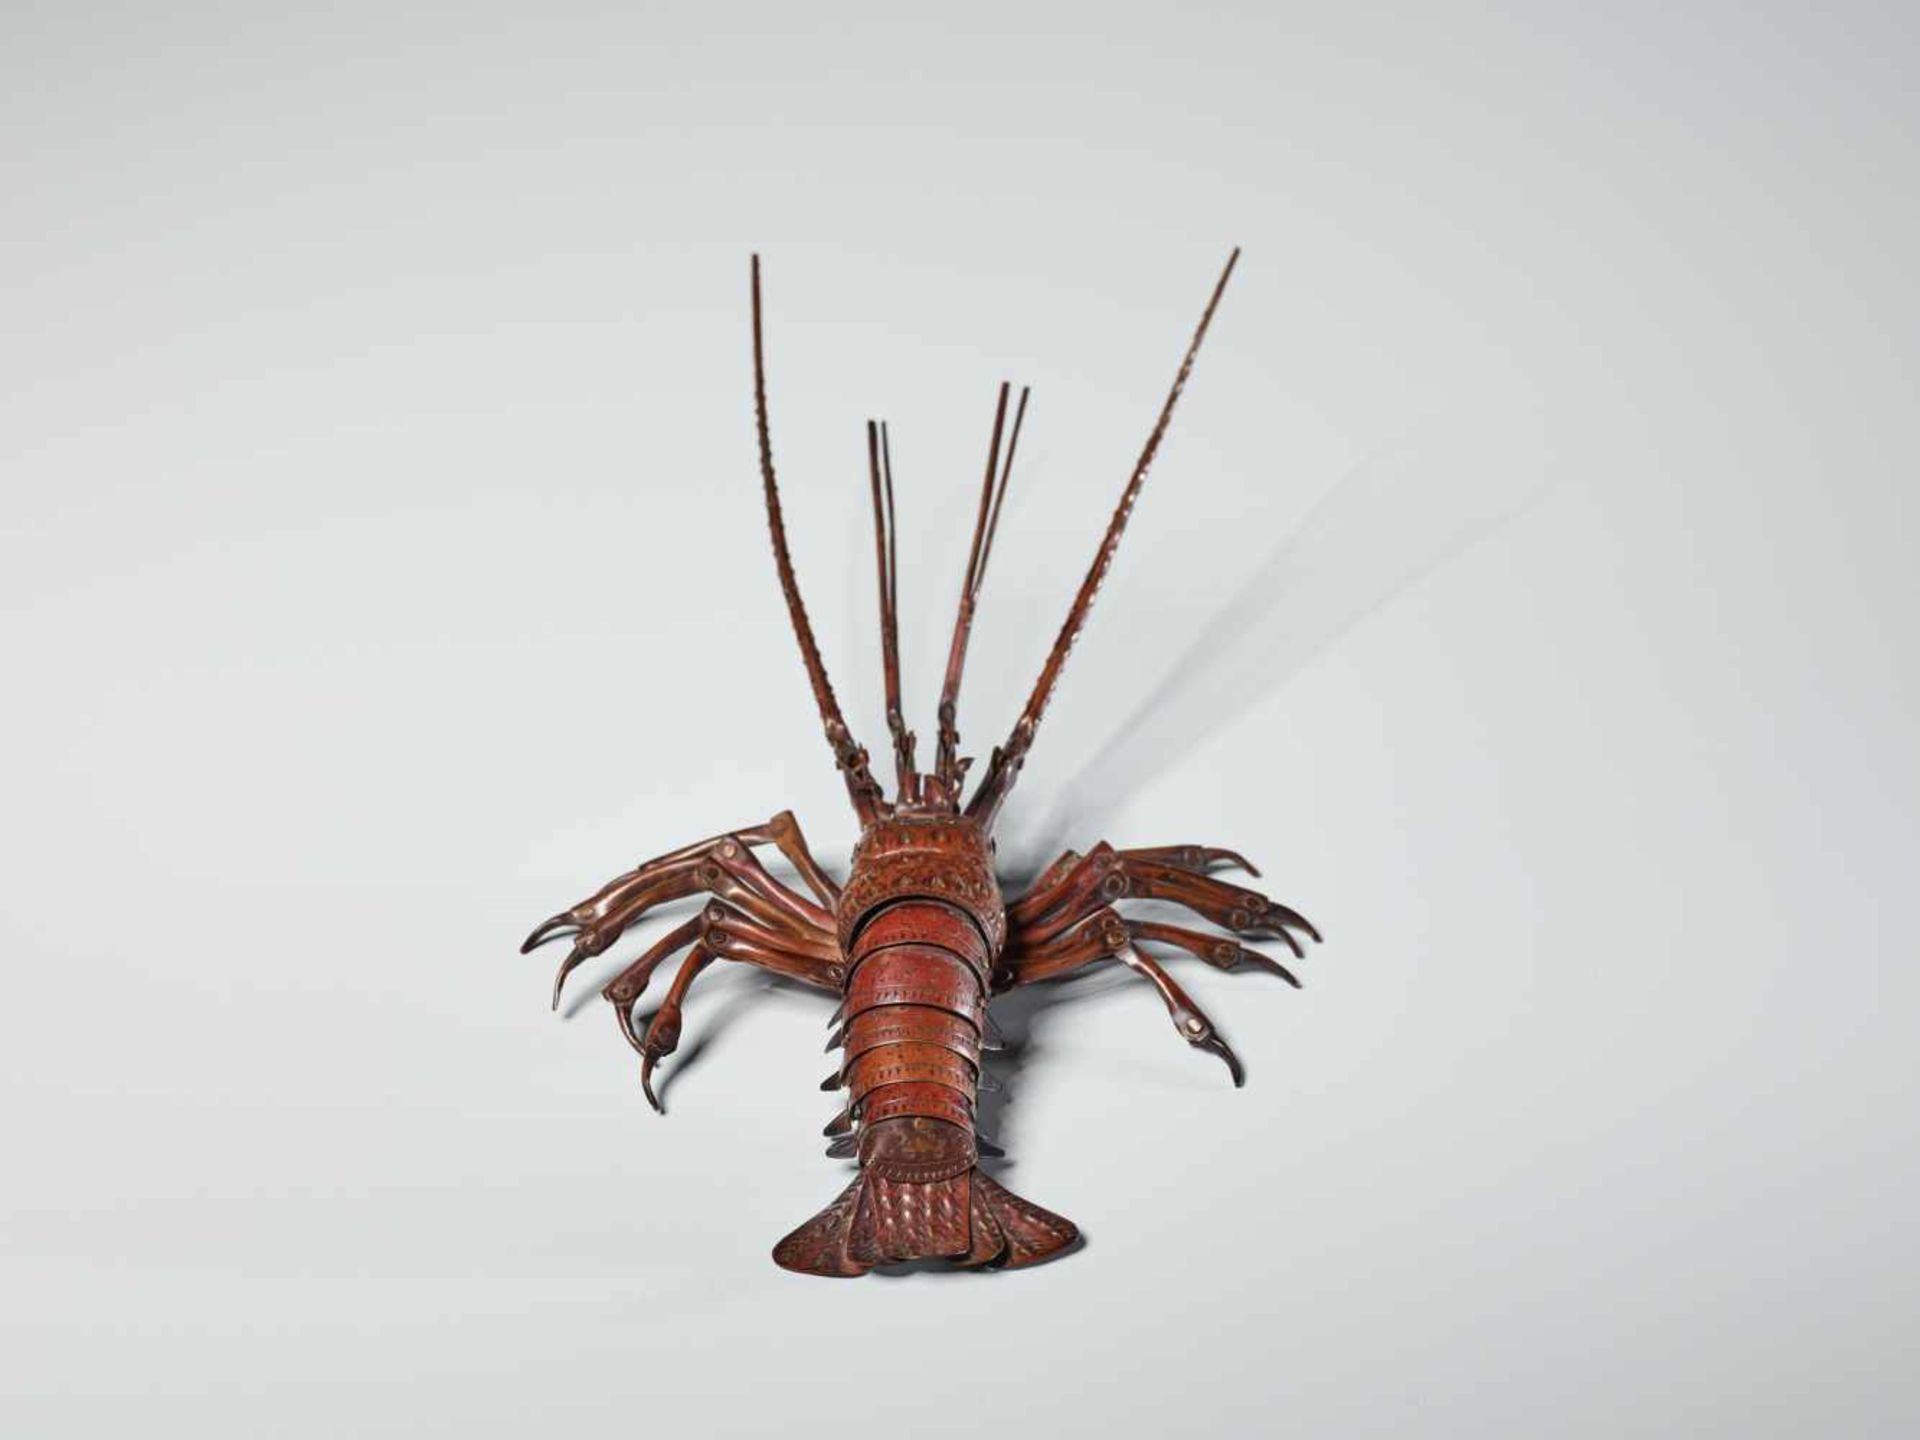 A PAIR OF FULLY ARTICULATED JIZAI OKIMONO DEPICTING EBI (SPINY LOBSTER) BY HIROYOSHICopperJapan, - Image 12 of 15